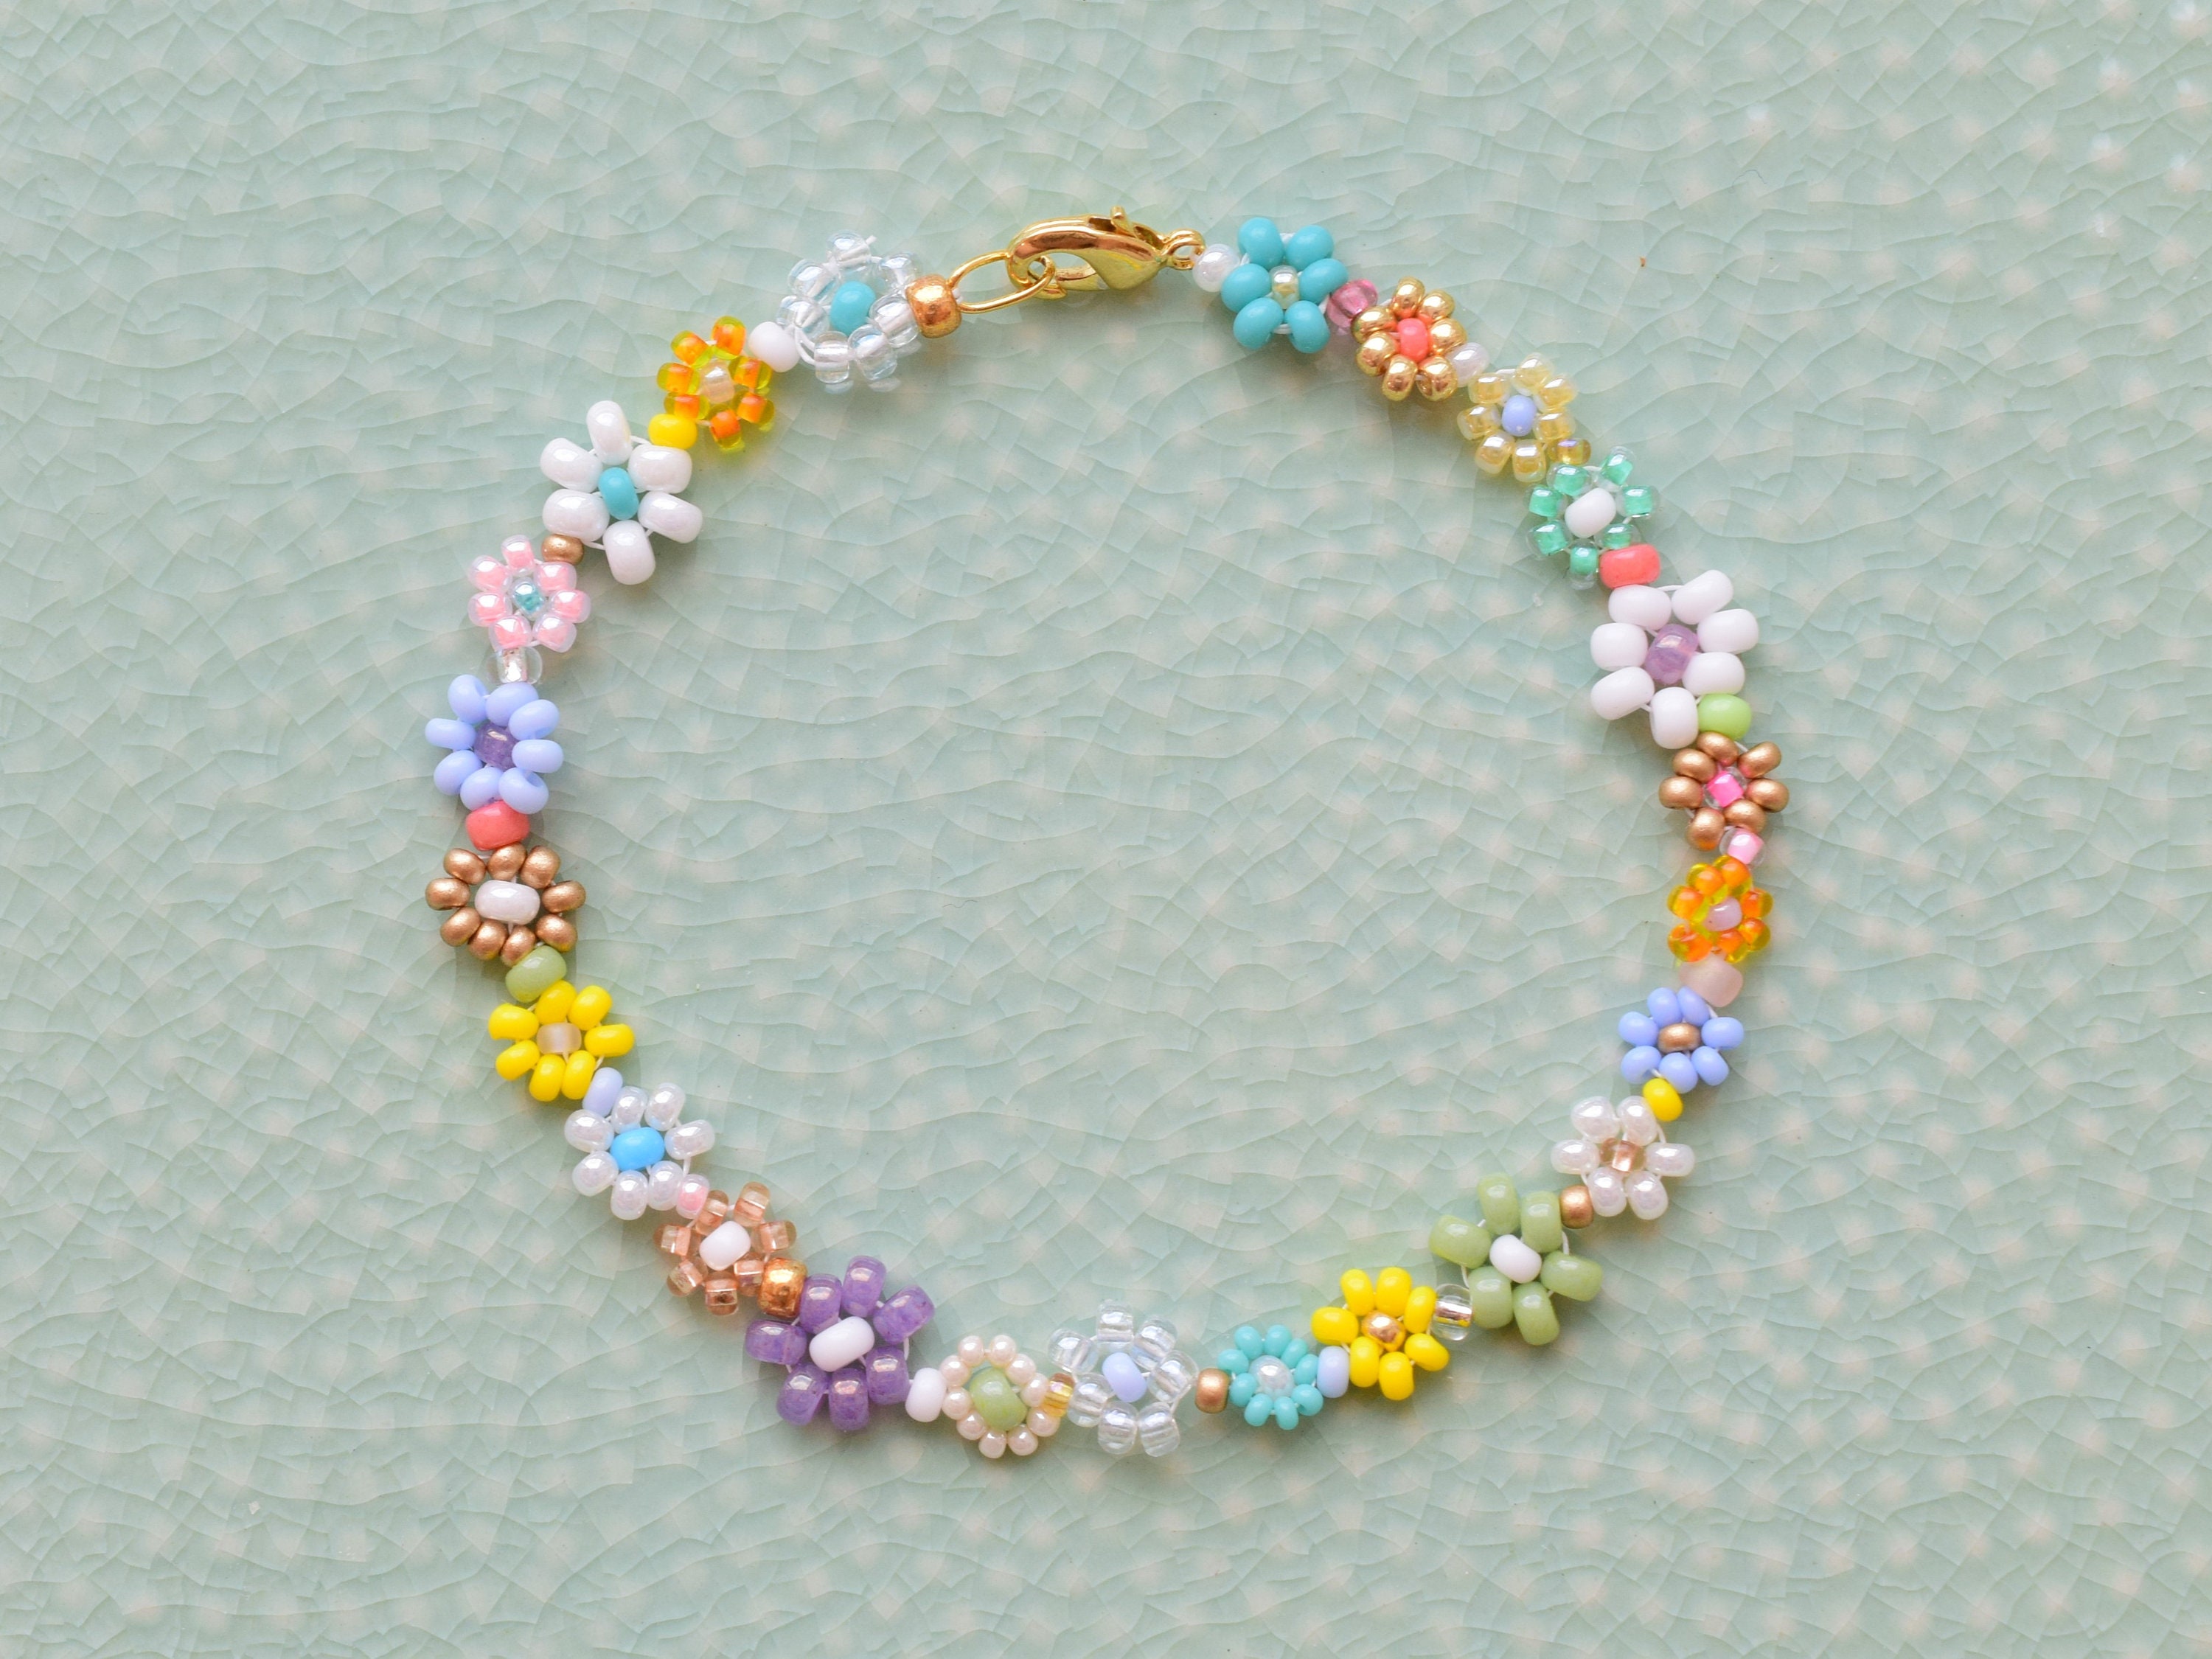 Adjustable Woven Cord Women's Bracelet Geometric Daisy Colorful Pearl  Bracelet - China Bracelet and Jewelry price | Made-in-China.com